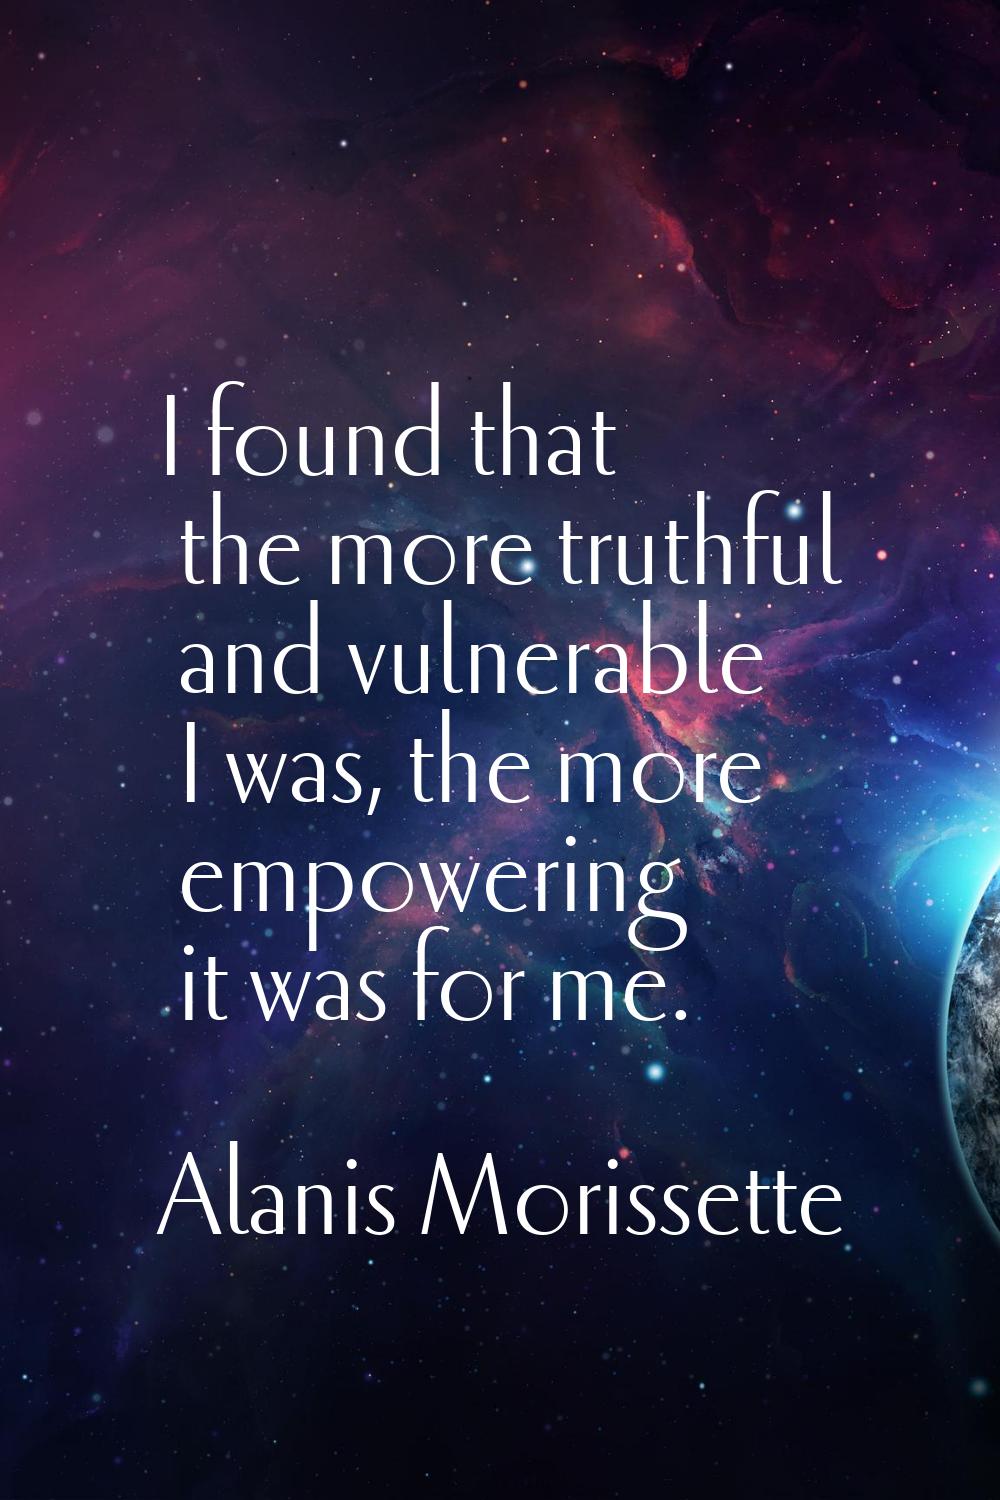 I found that the more truthful and vulnerable I was, the more empowering it was for me.